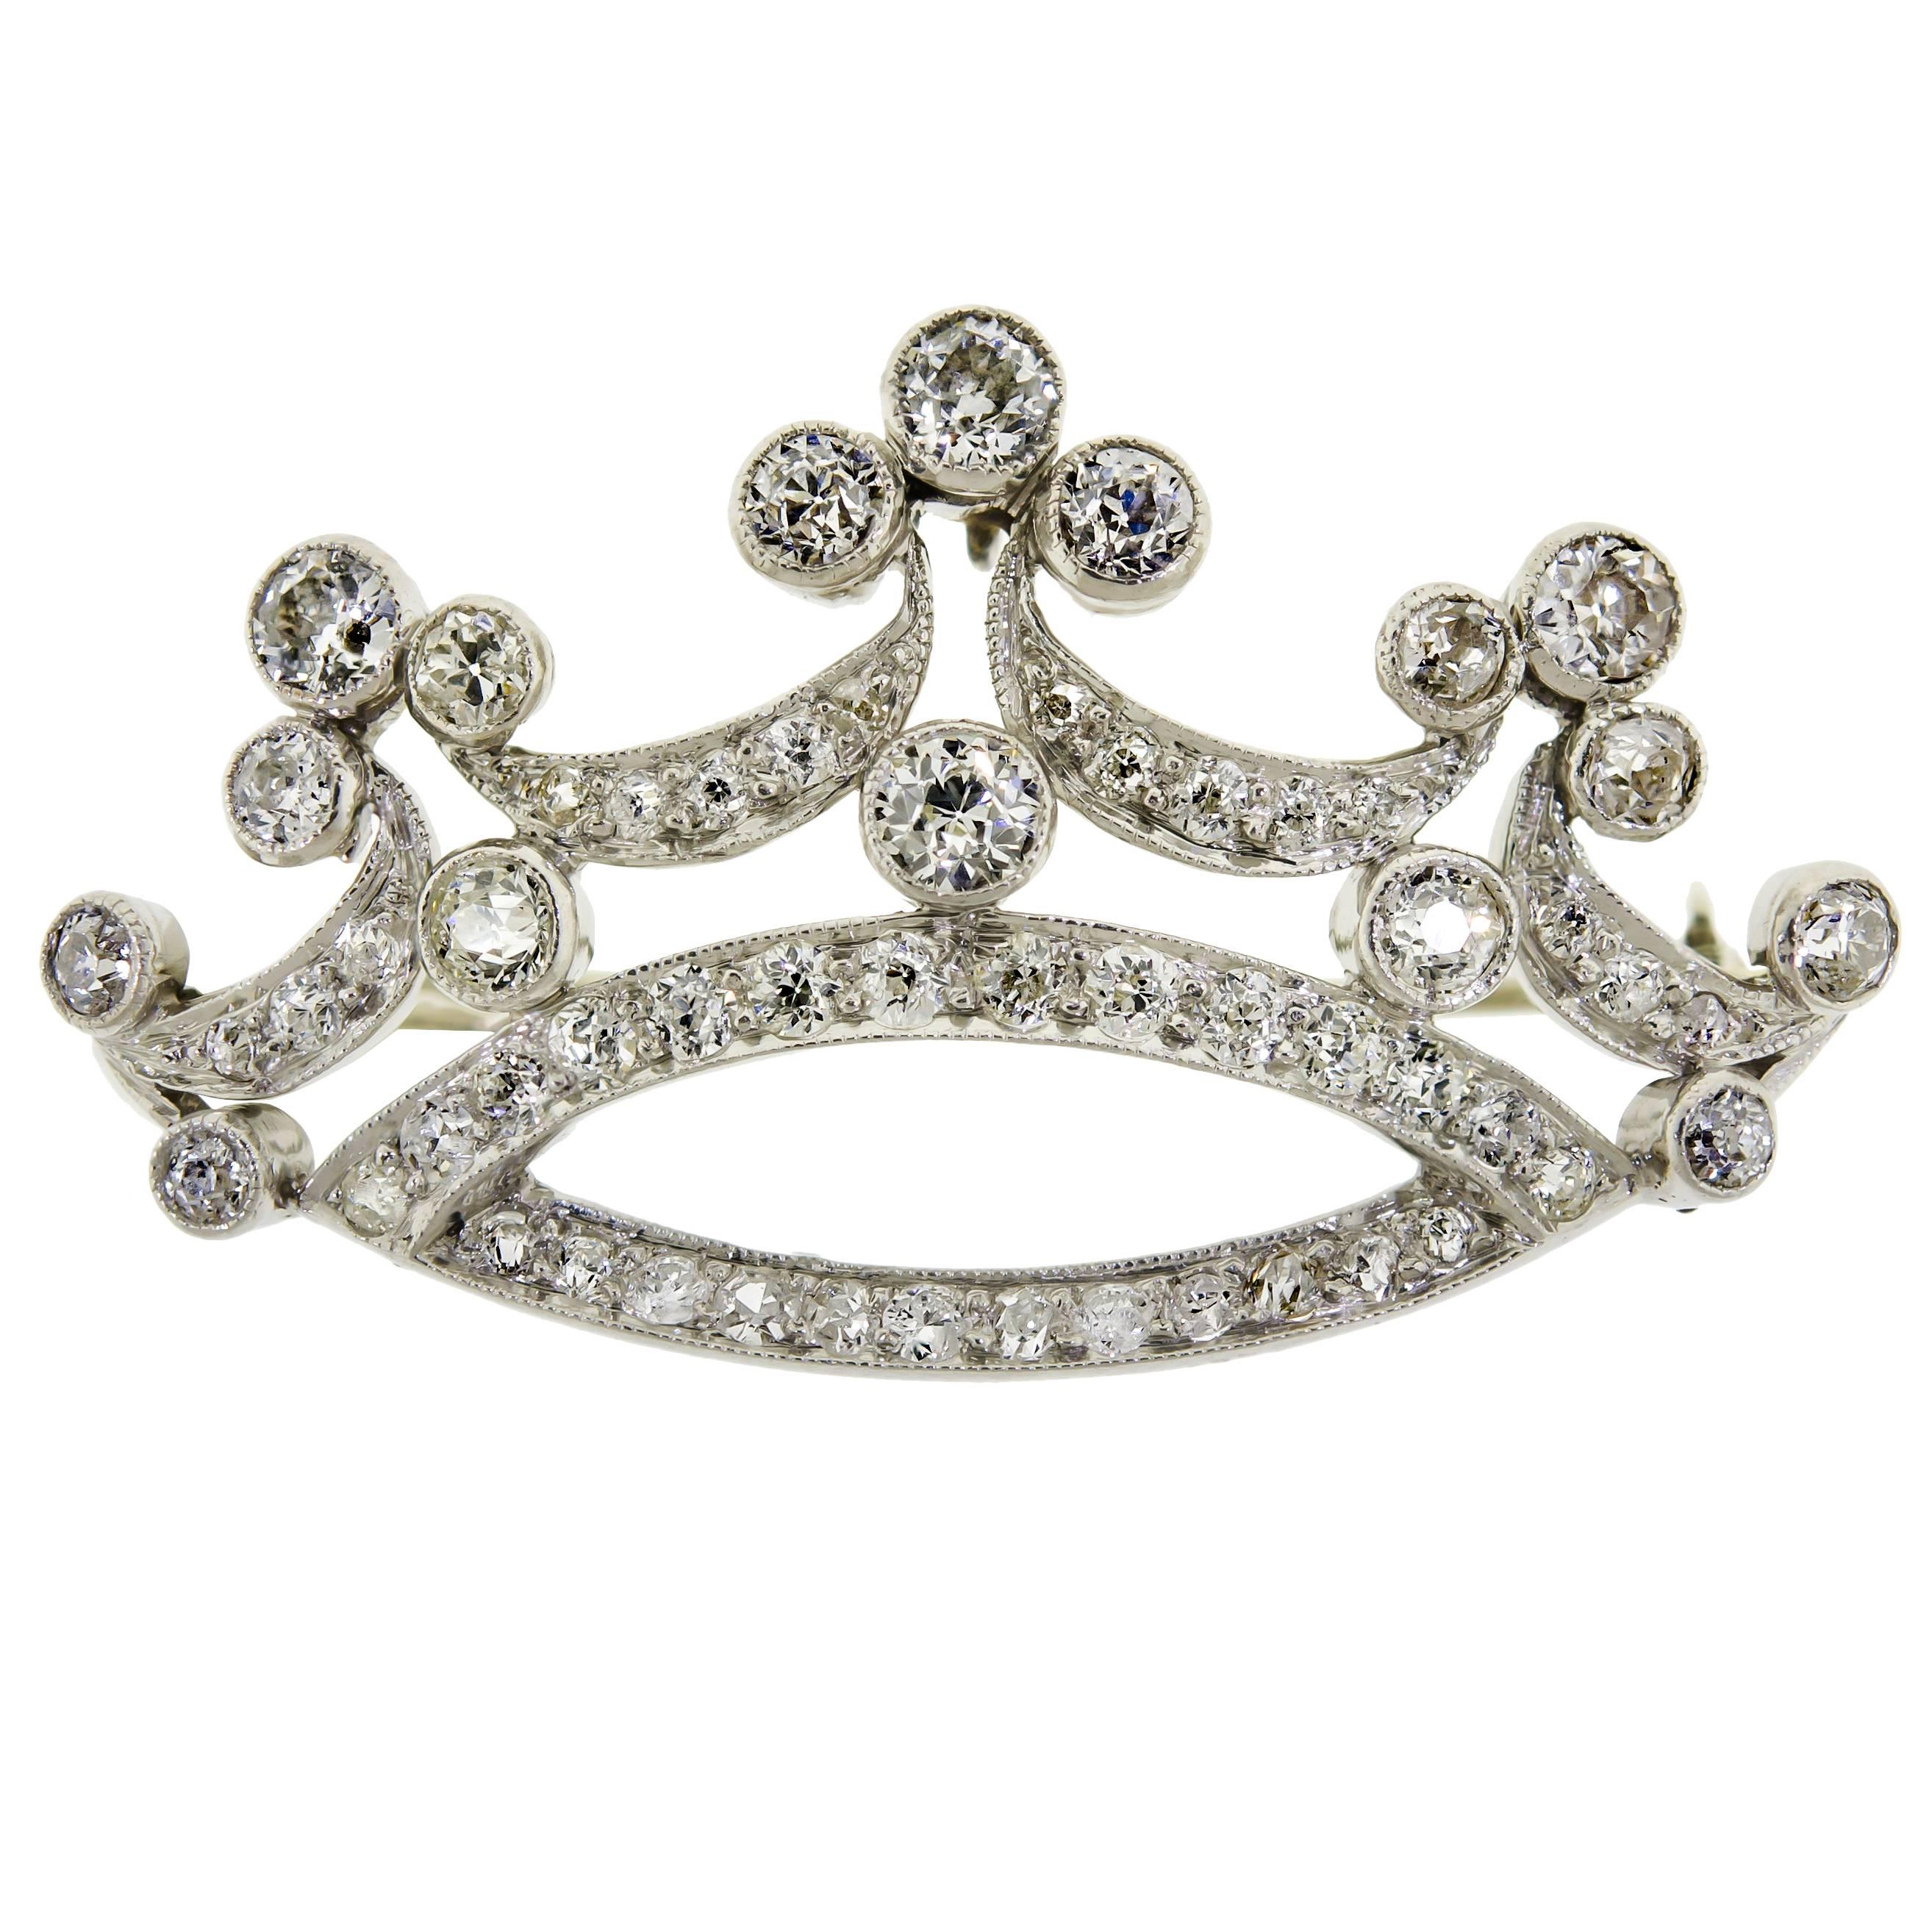 Lovely Antique Edwardian Diamond and Platinum Crown Brooch For Sale